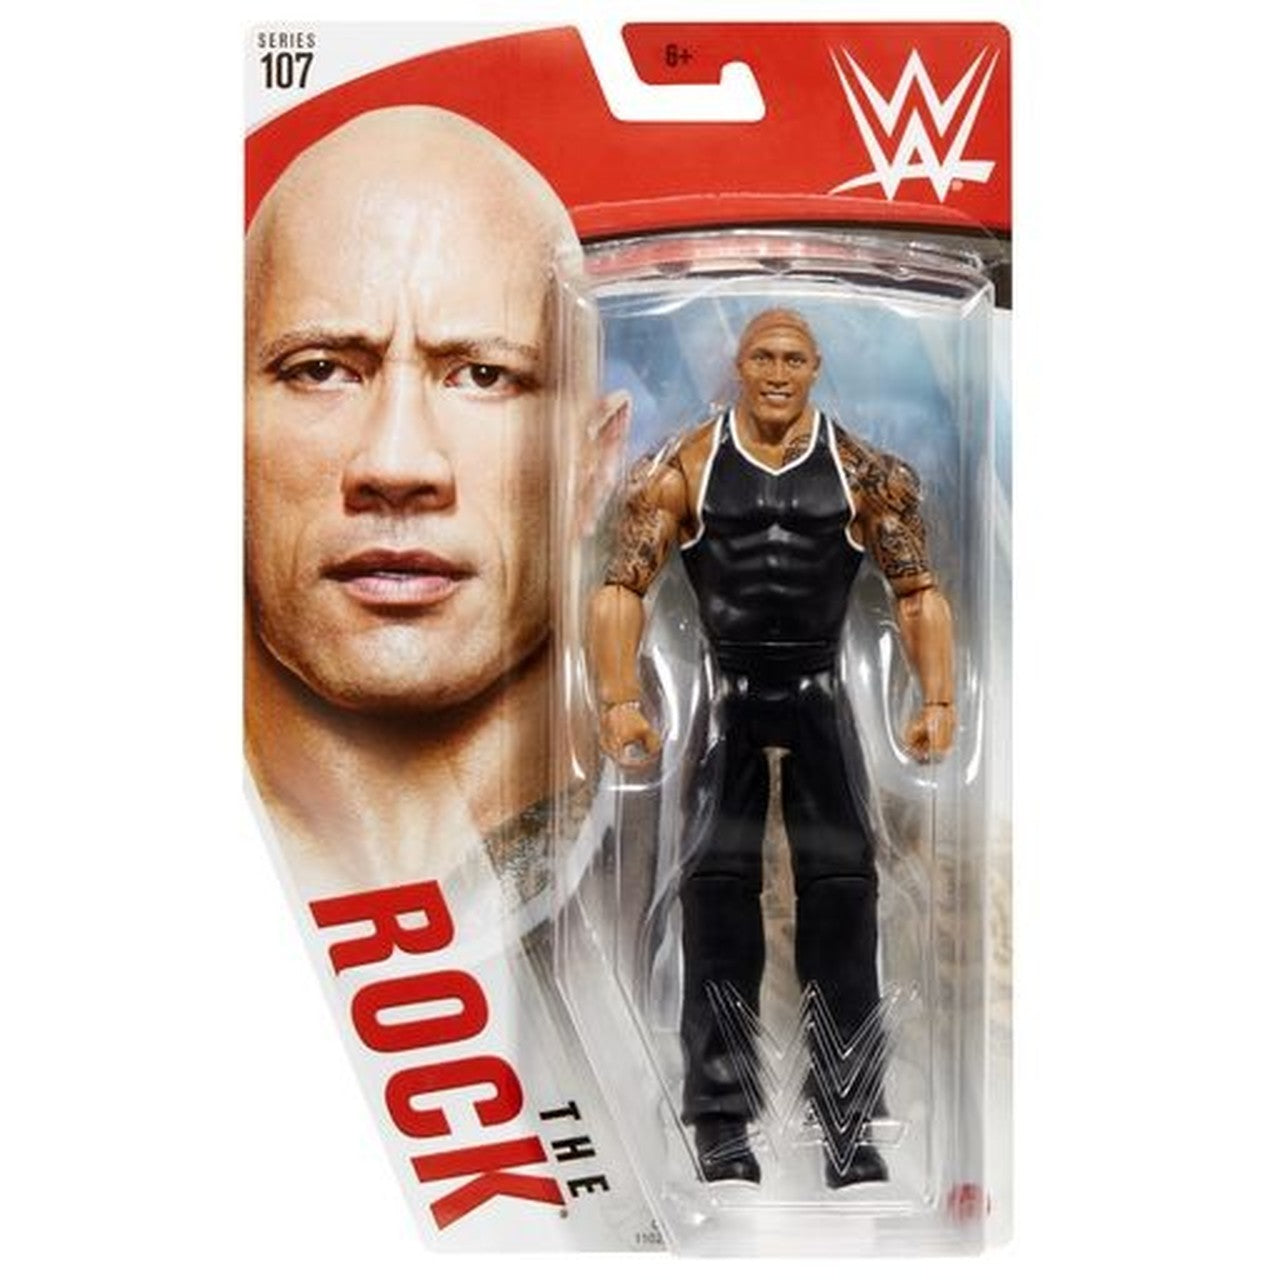 the wwe toys